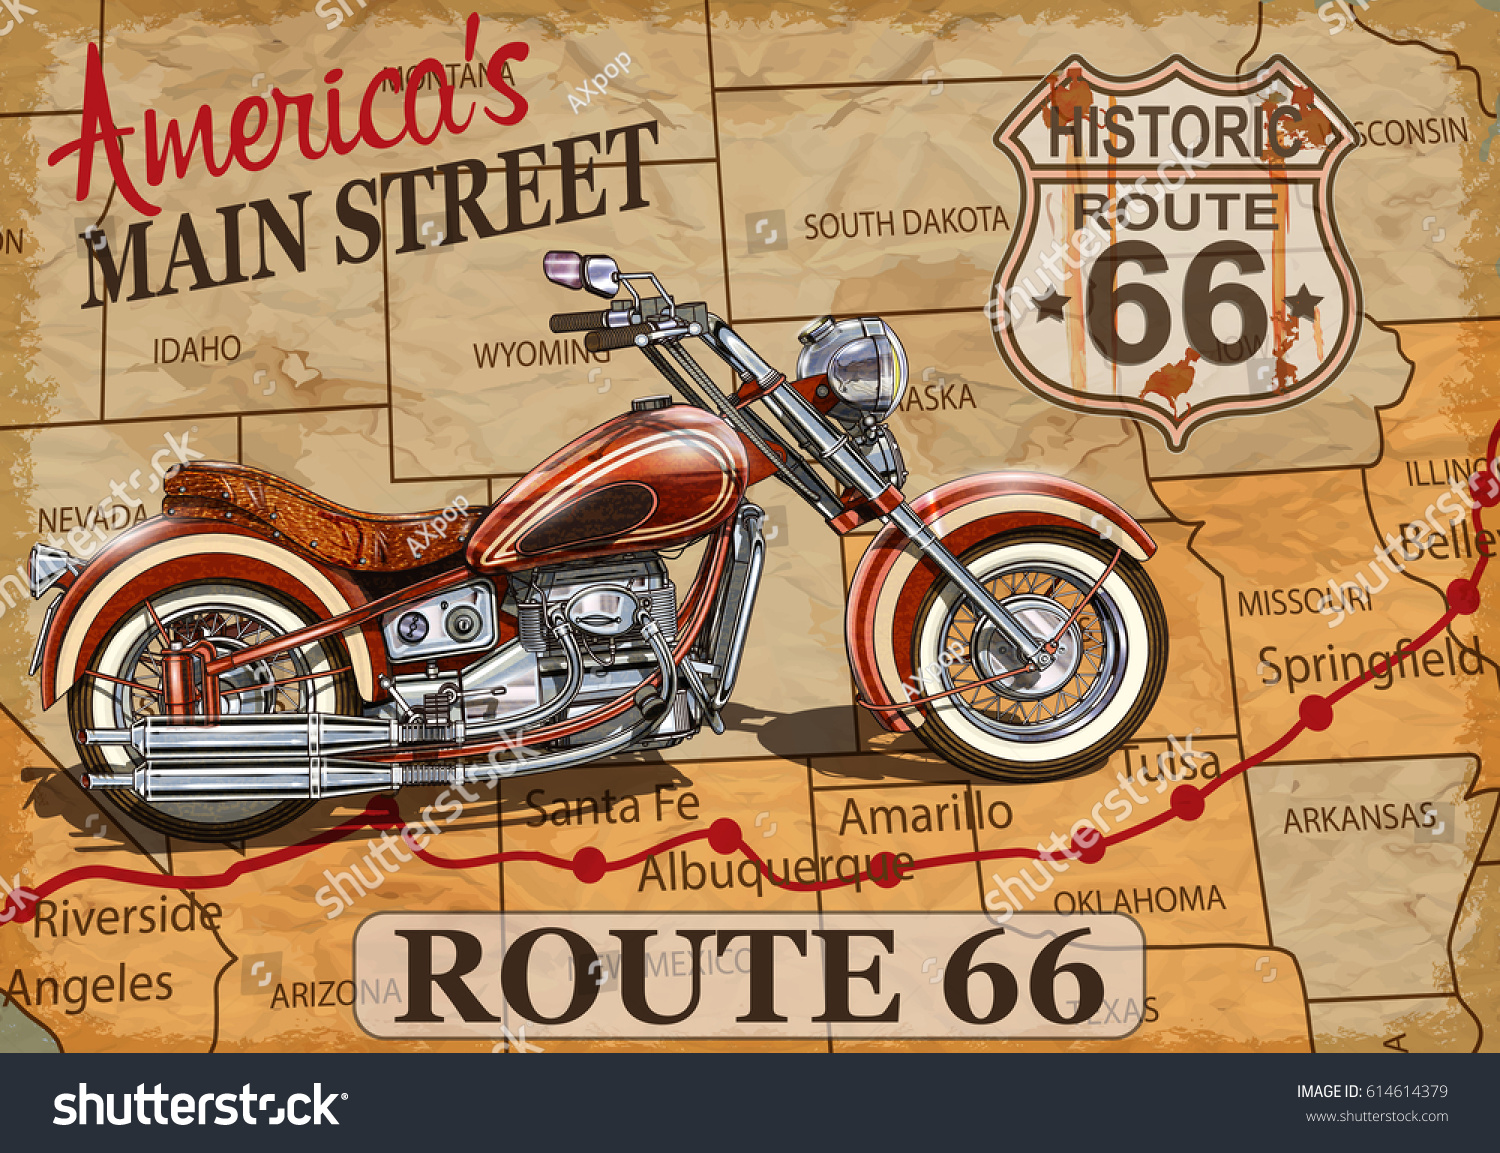 MOTORCYCLE RIDING U.S ROUTE 66 LIFE IS GOOD ENJOY BIKE VINTAGE POSTER REPRO